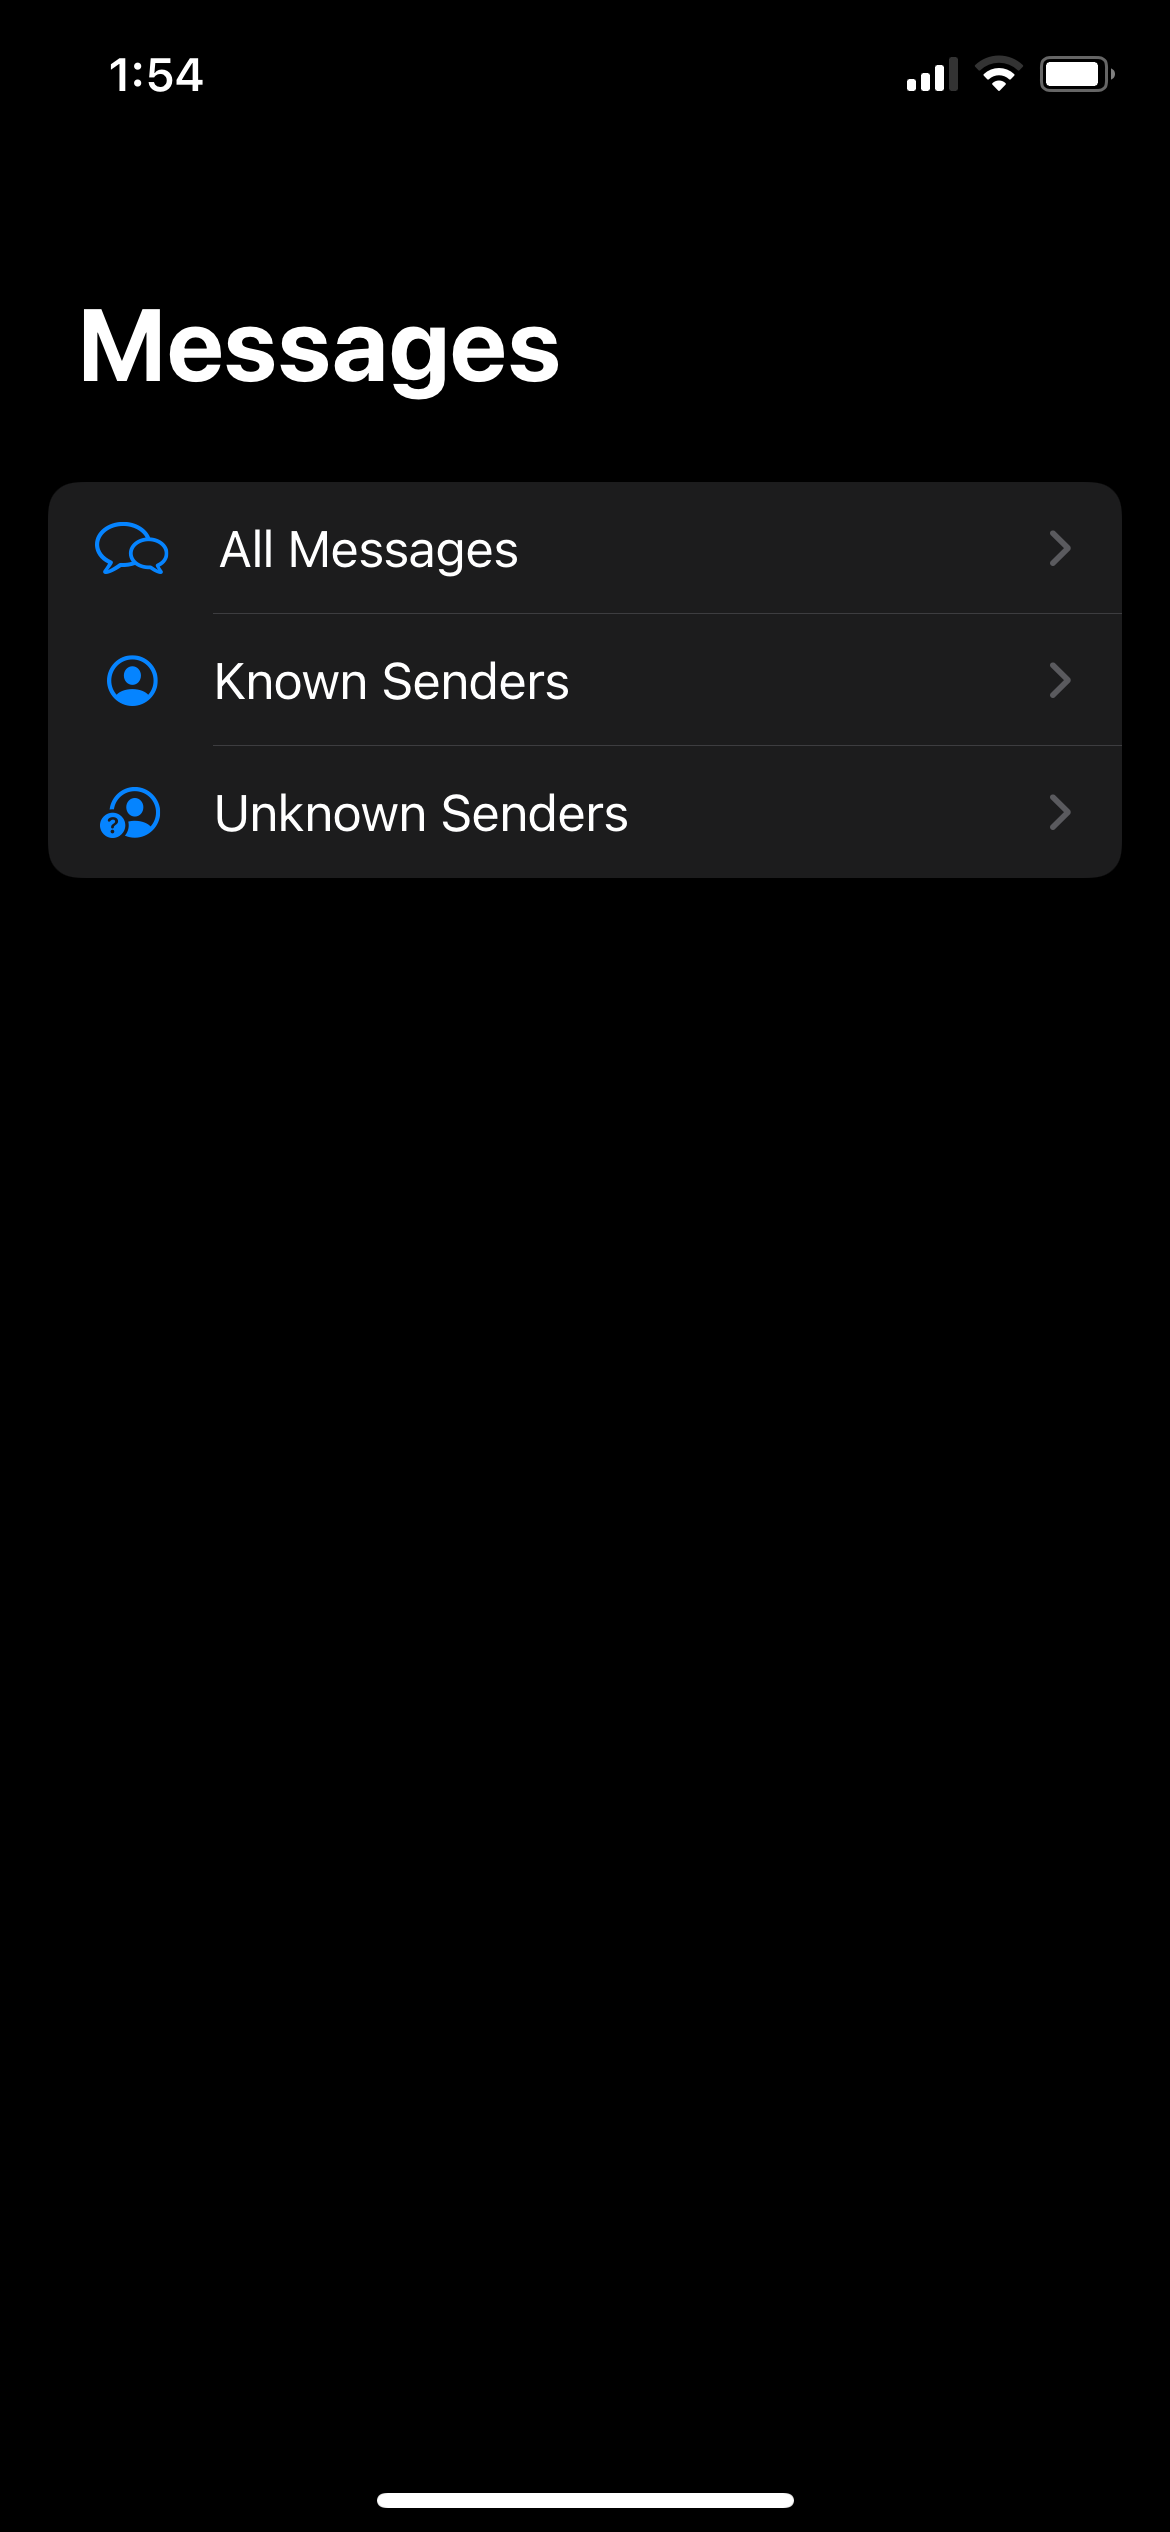 Messages Filter Options Showing All Messages, Known Senders, and Unknown Senders